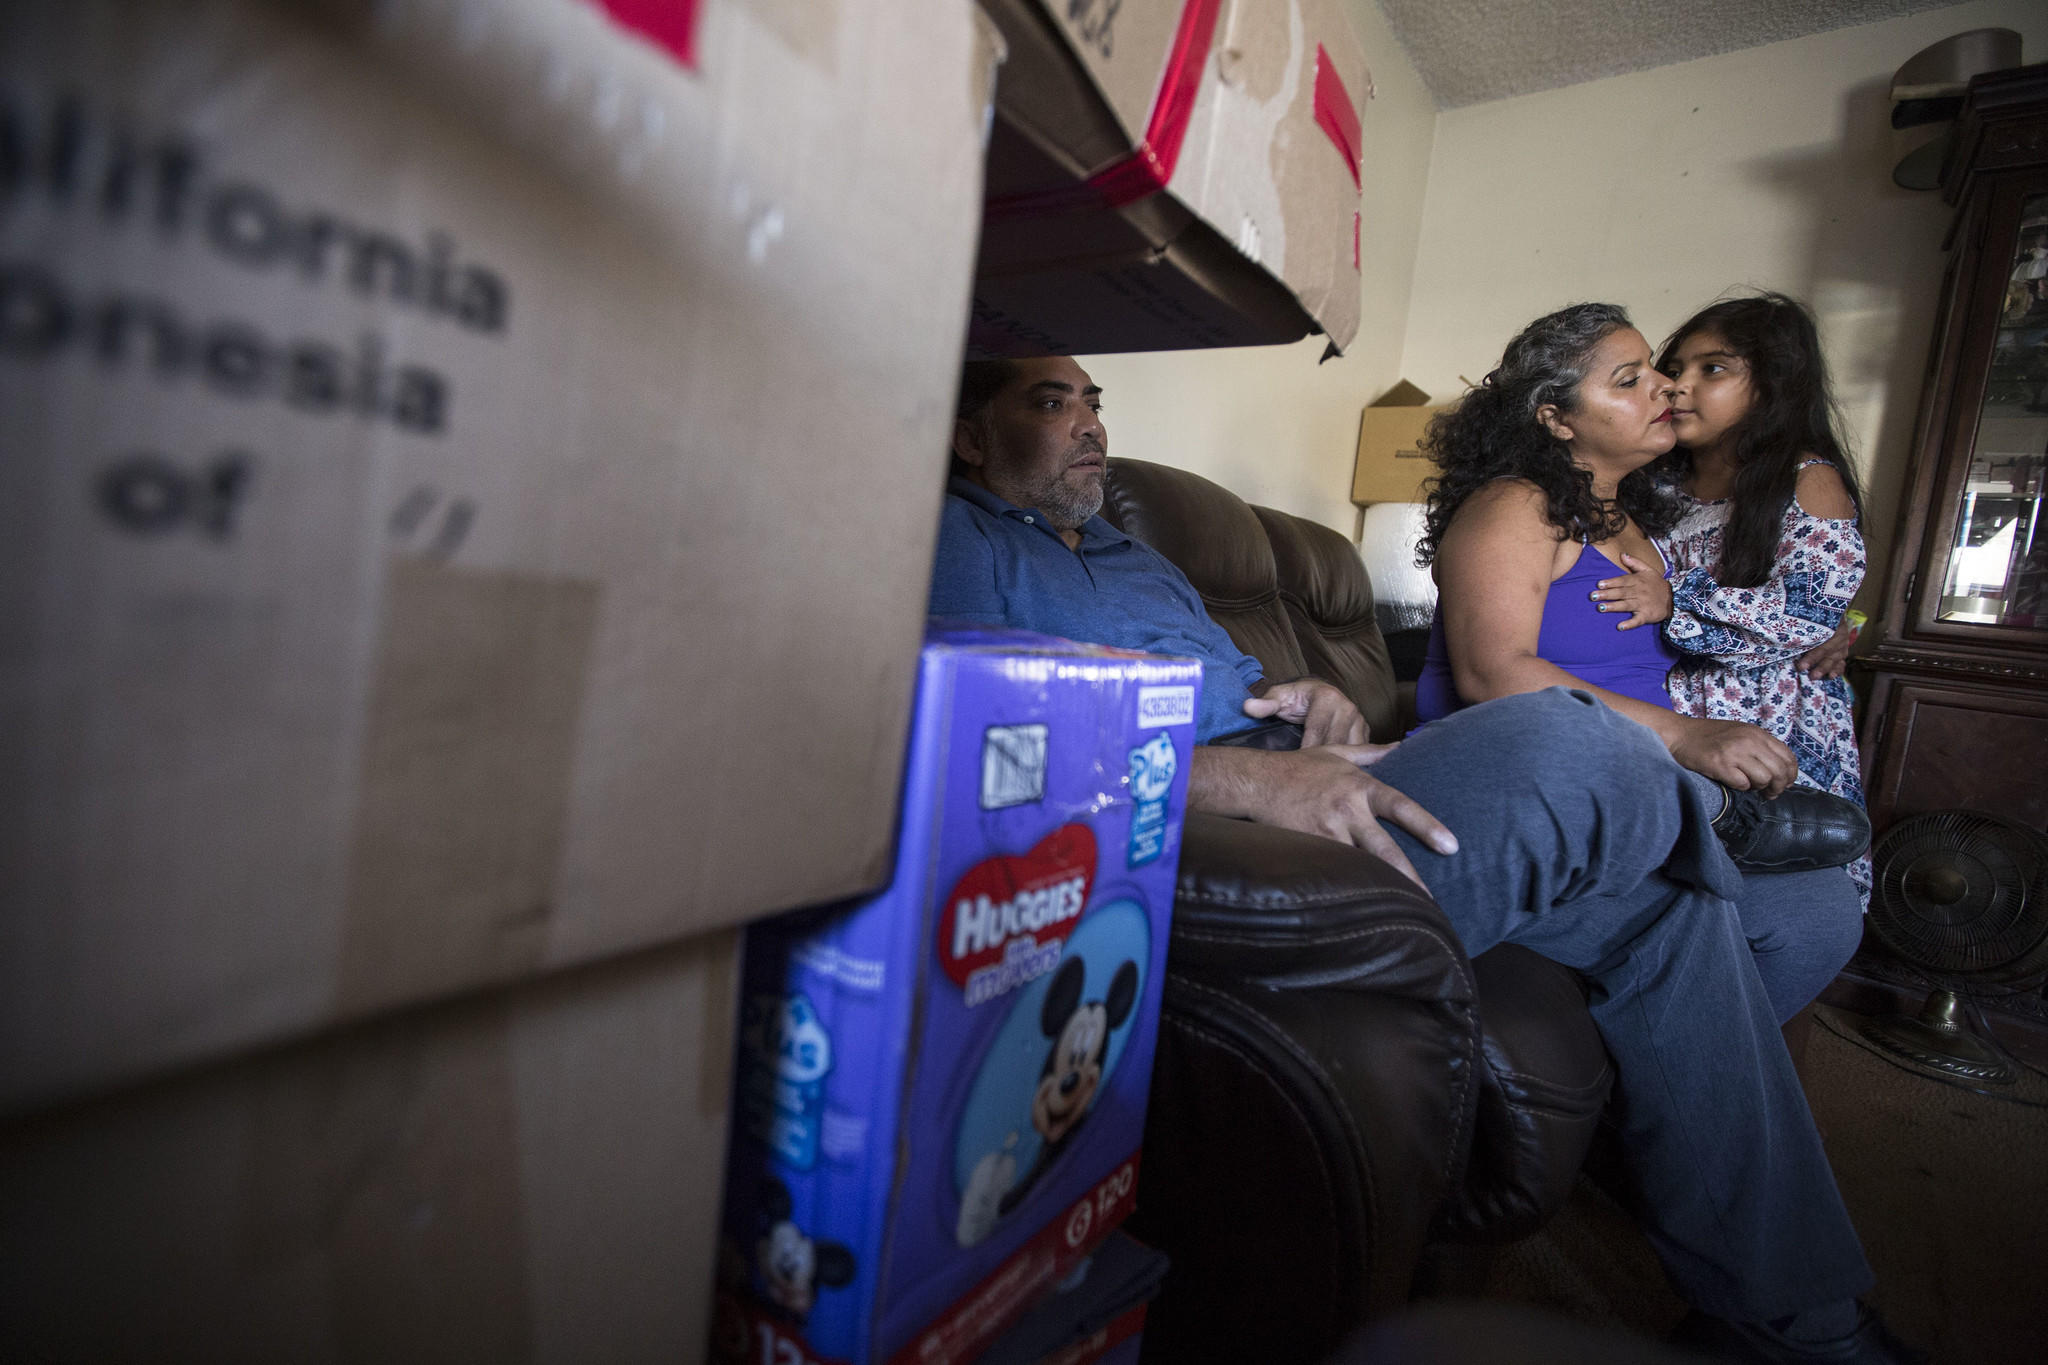 Ricardo Madrigal and his wife, Maria Barrancas, and their daughter Luz, 6, relax in their apartment after packing up their belongings.